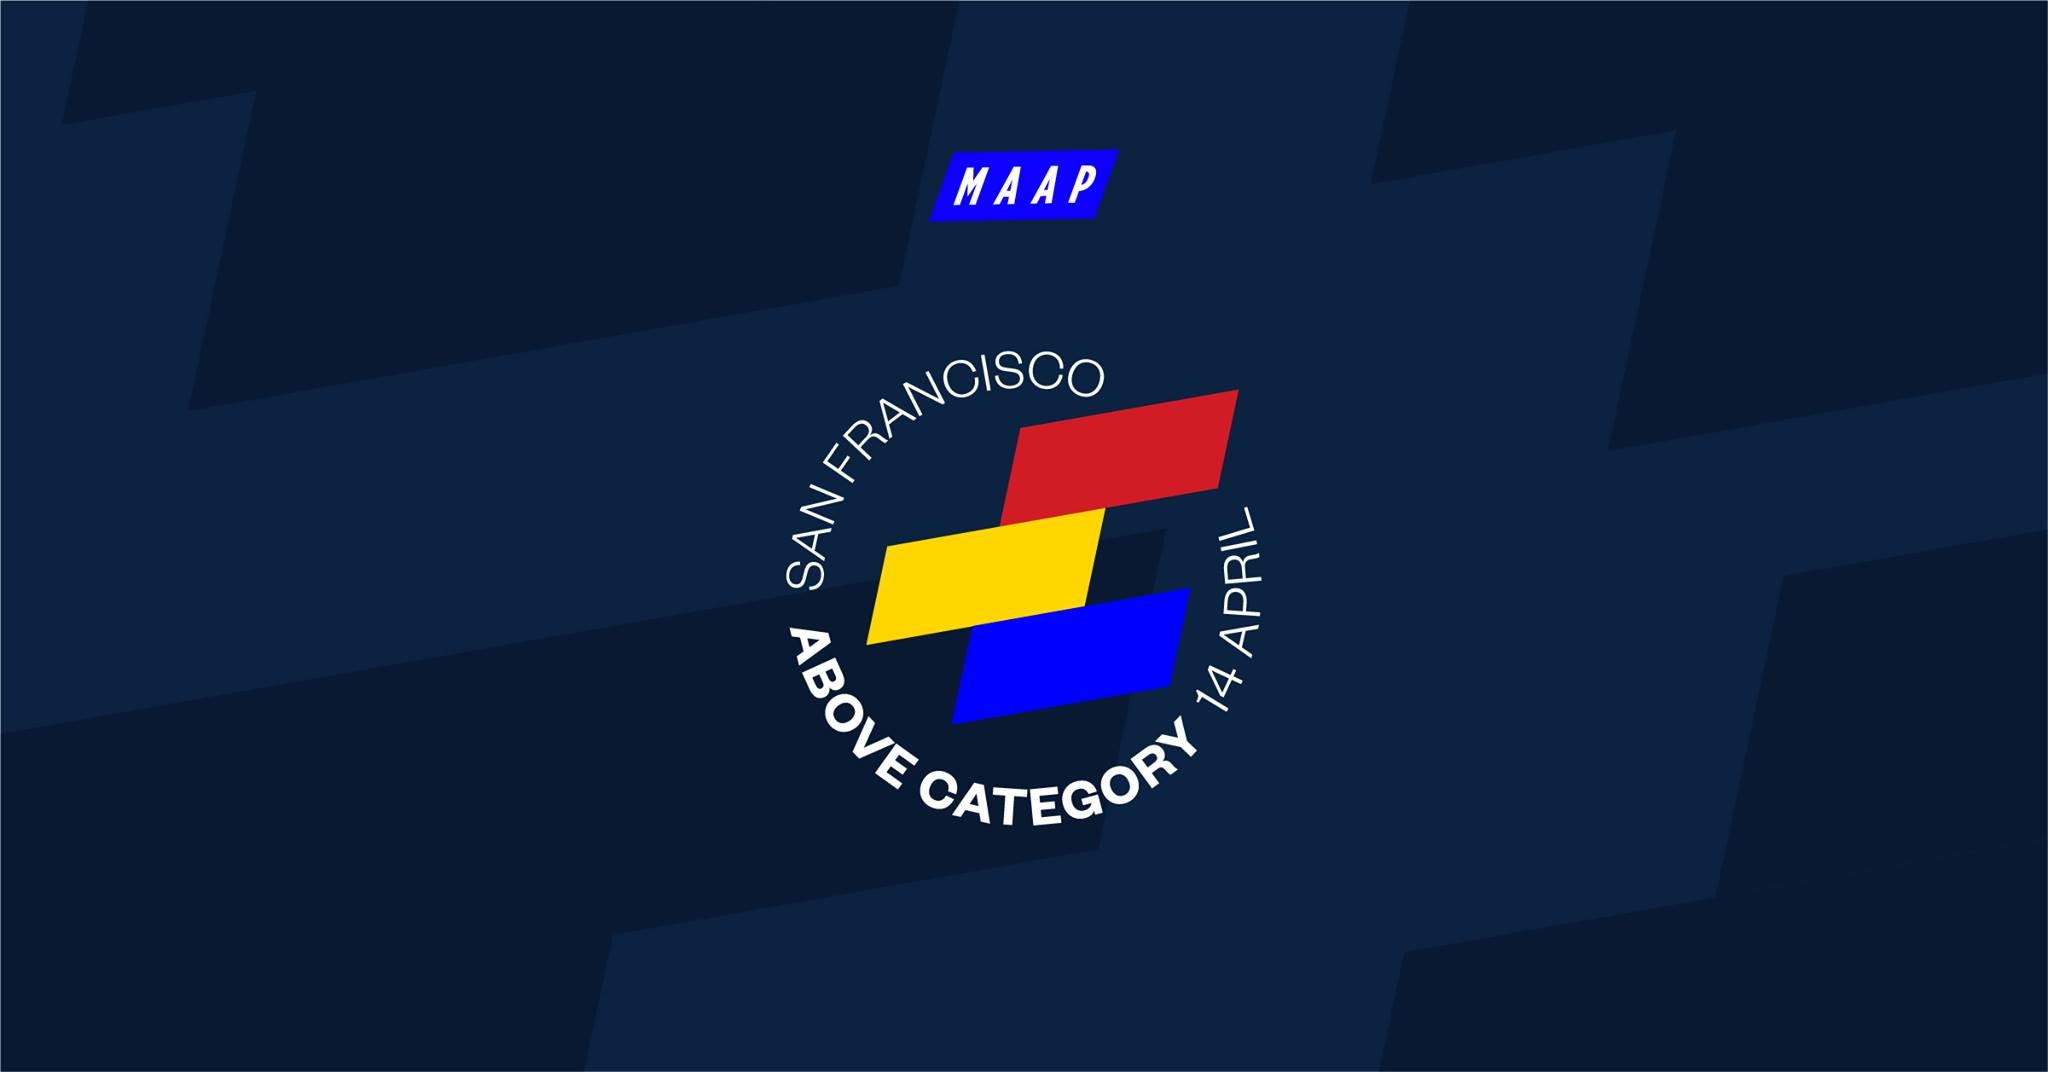 MAAP IN THE FIELD—RIDE WITH MAAP AND AC ON APRIL 14